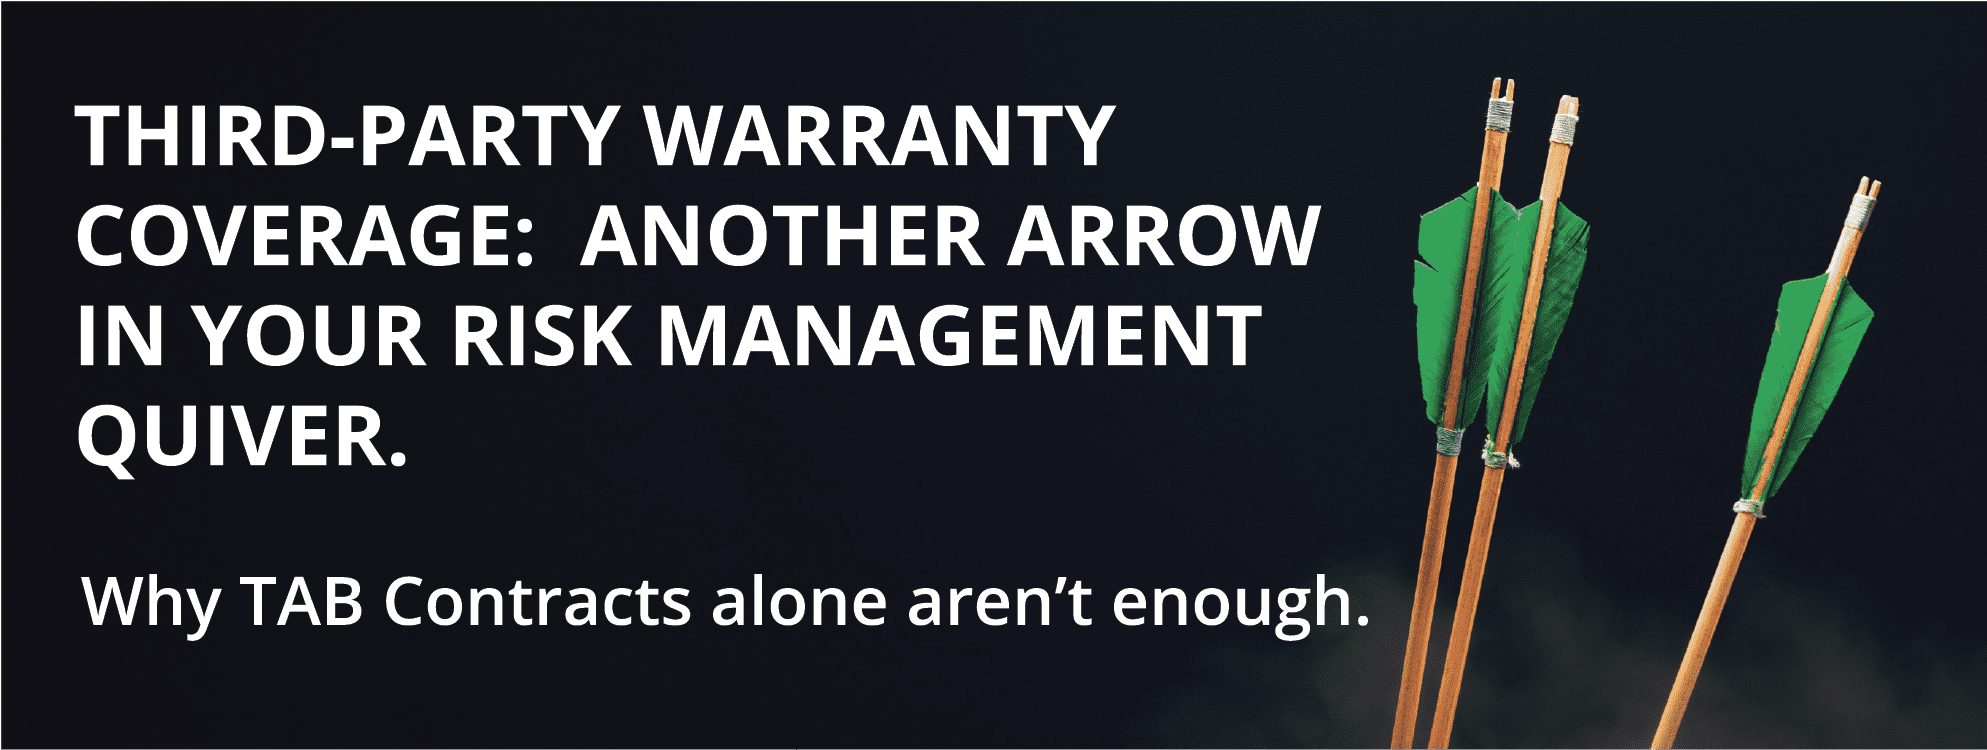 Third-Party Warranty Coverage: Another Arrow in Your Risk Management Quiver